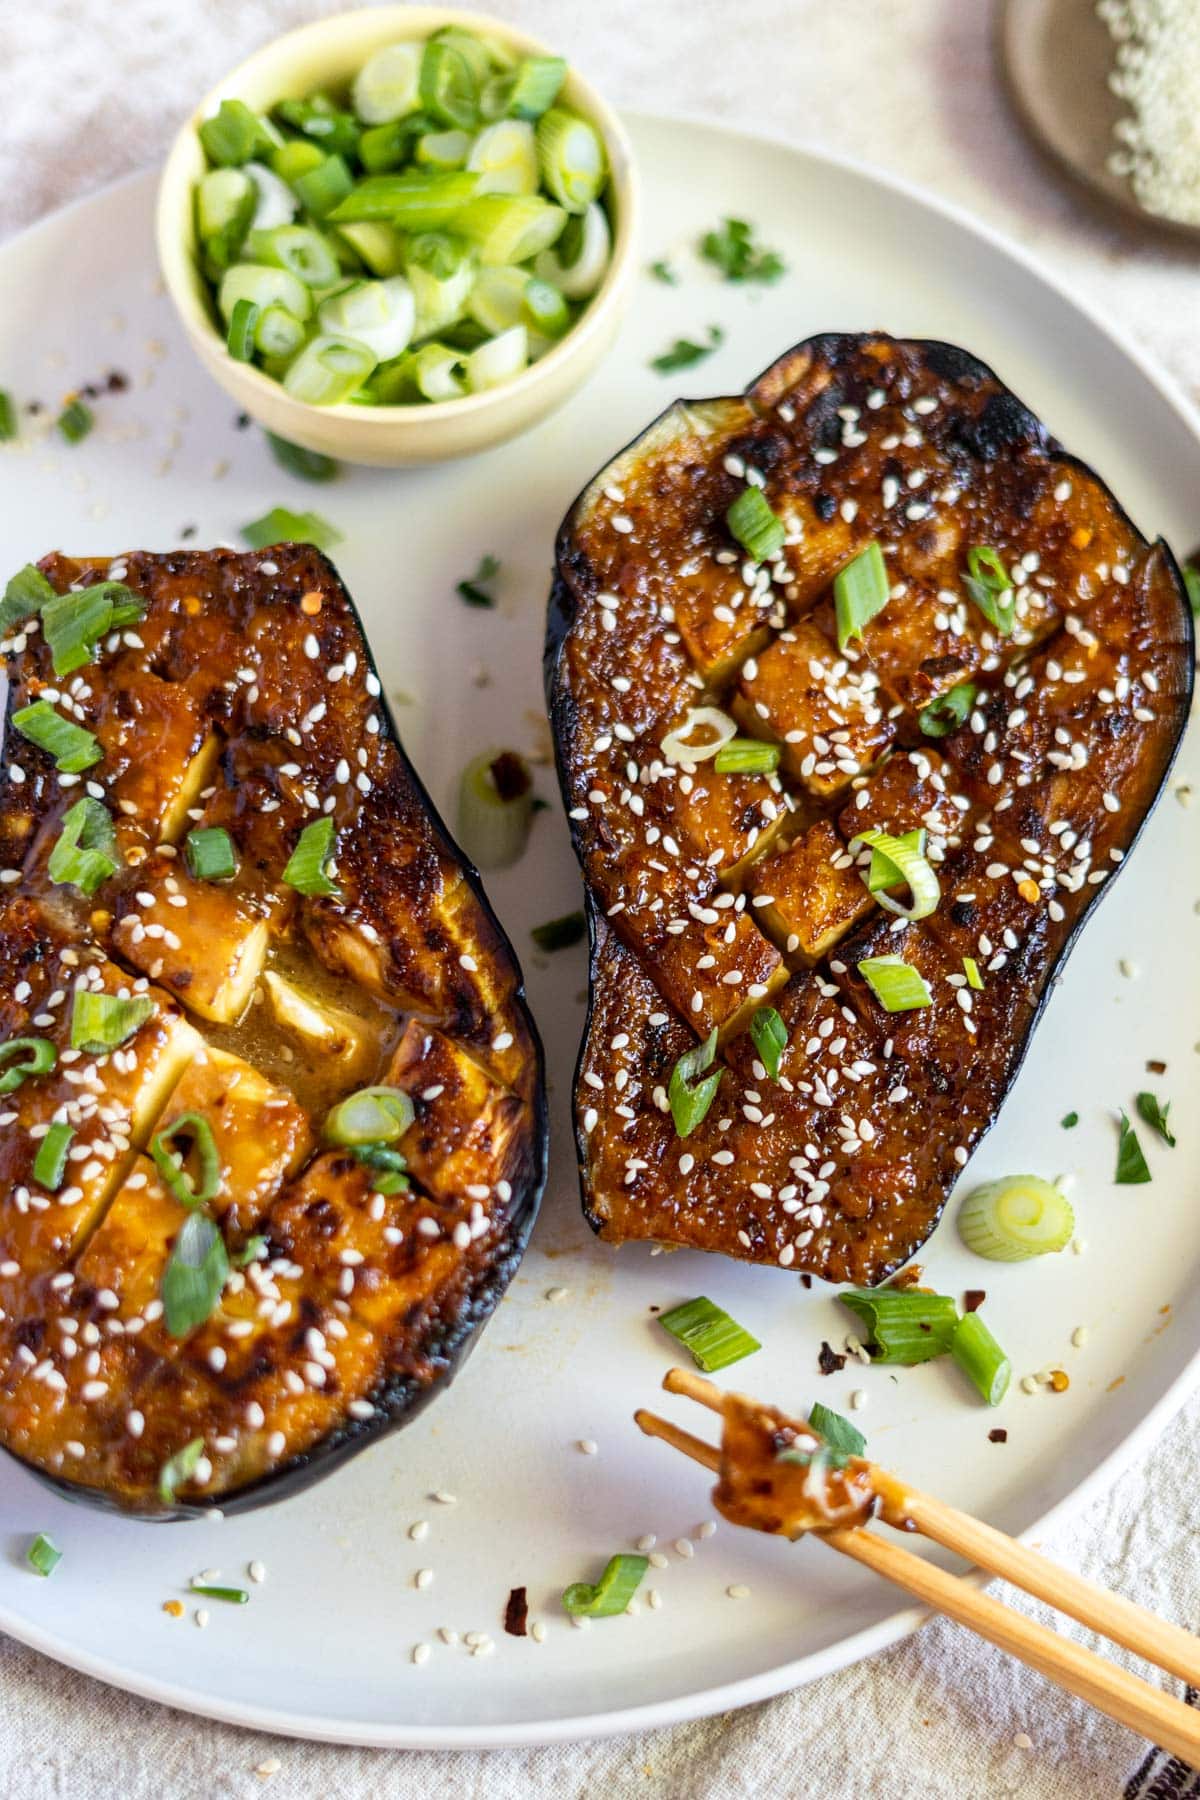 Miso baked eggplant with scallions on a plate.